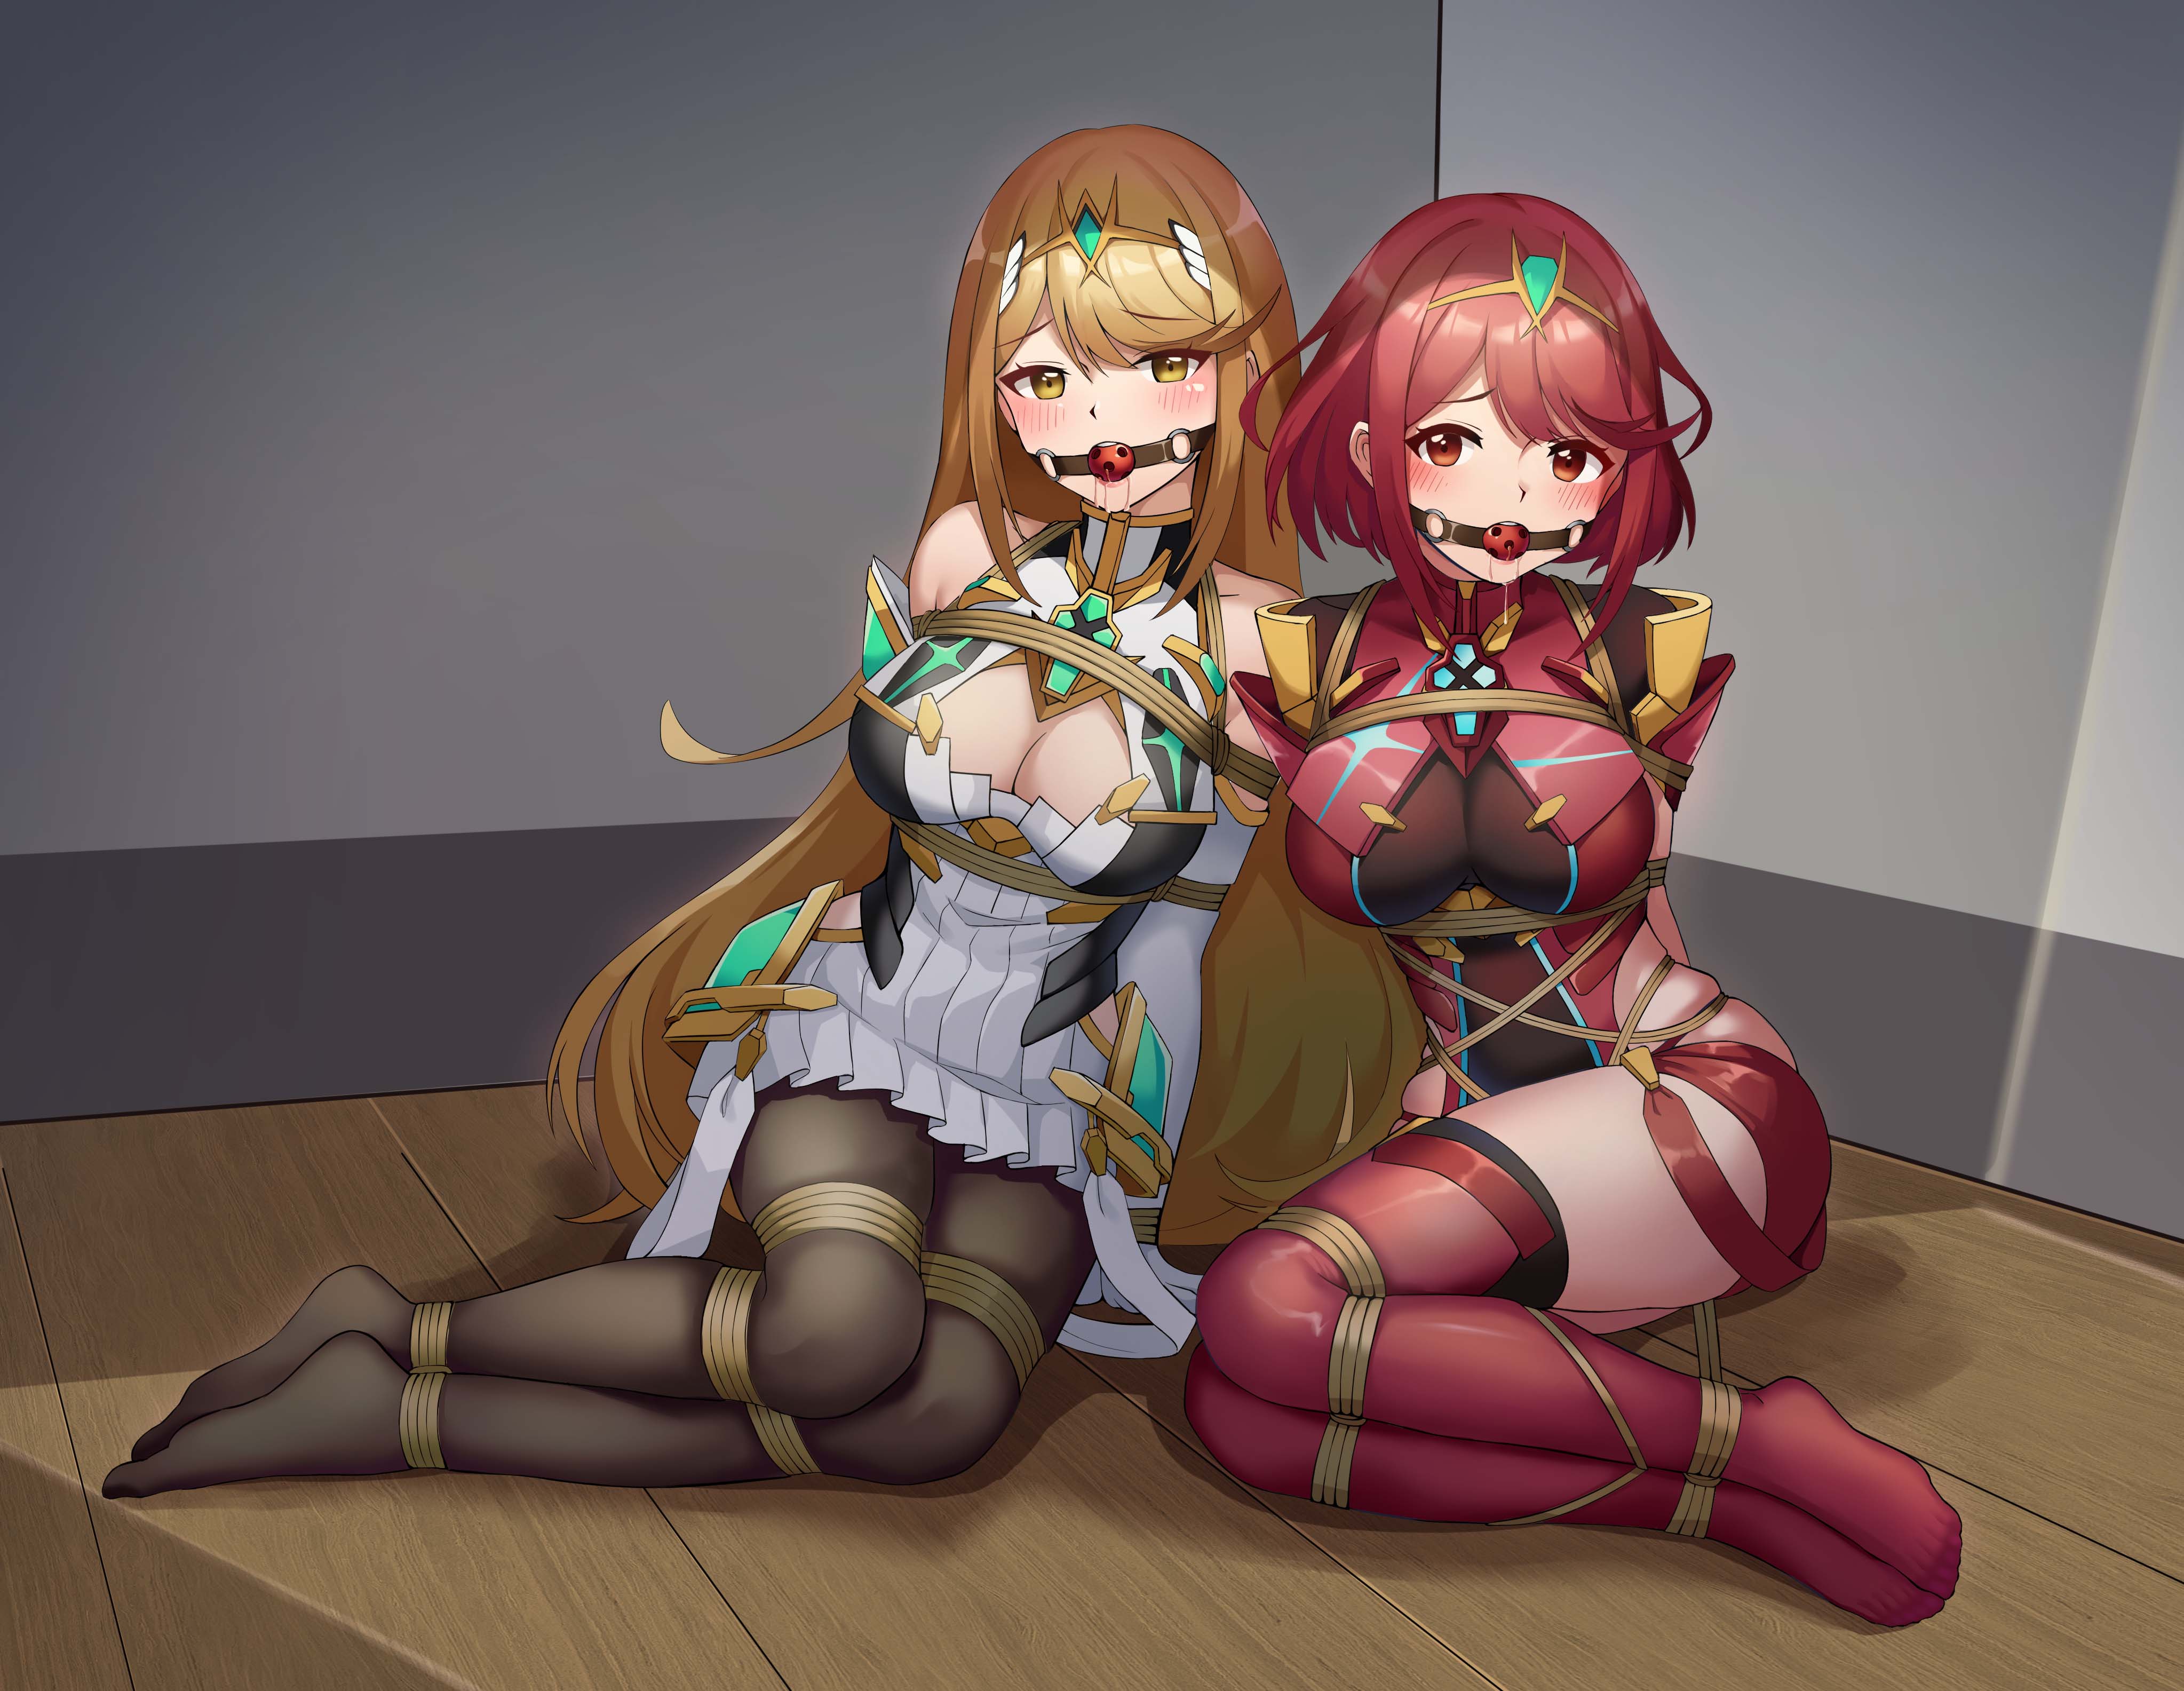 Pyra and mythra tied up